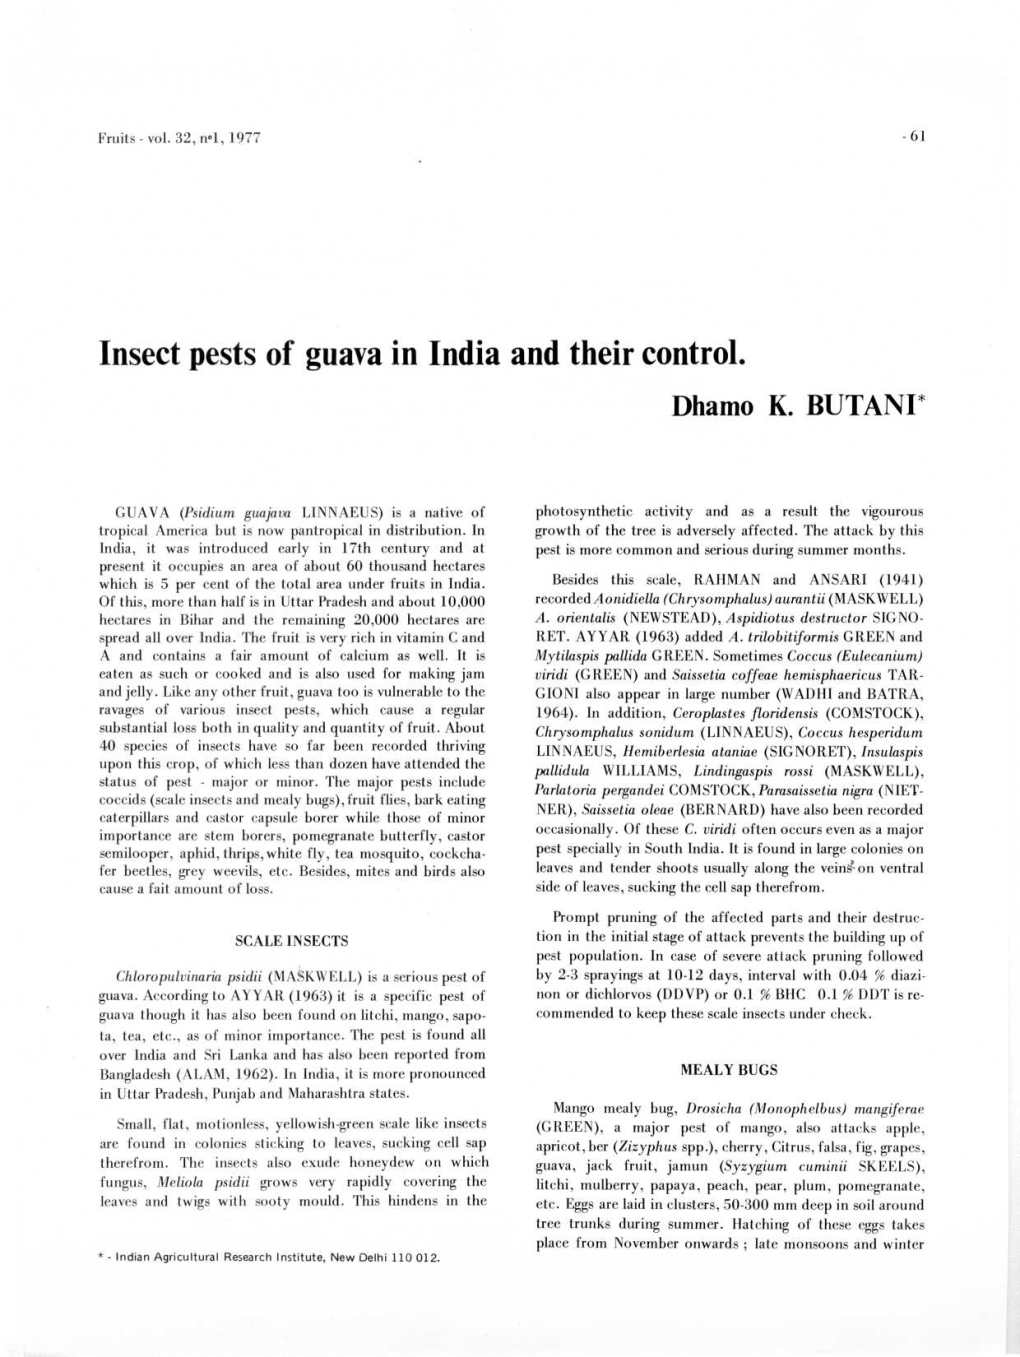 Insect Pests of Guava in India and Their Control